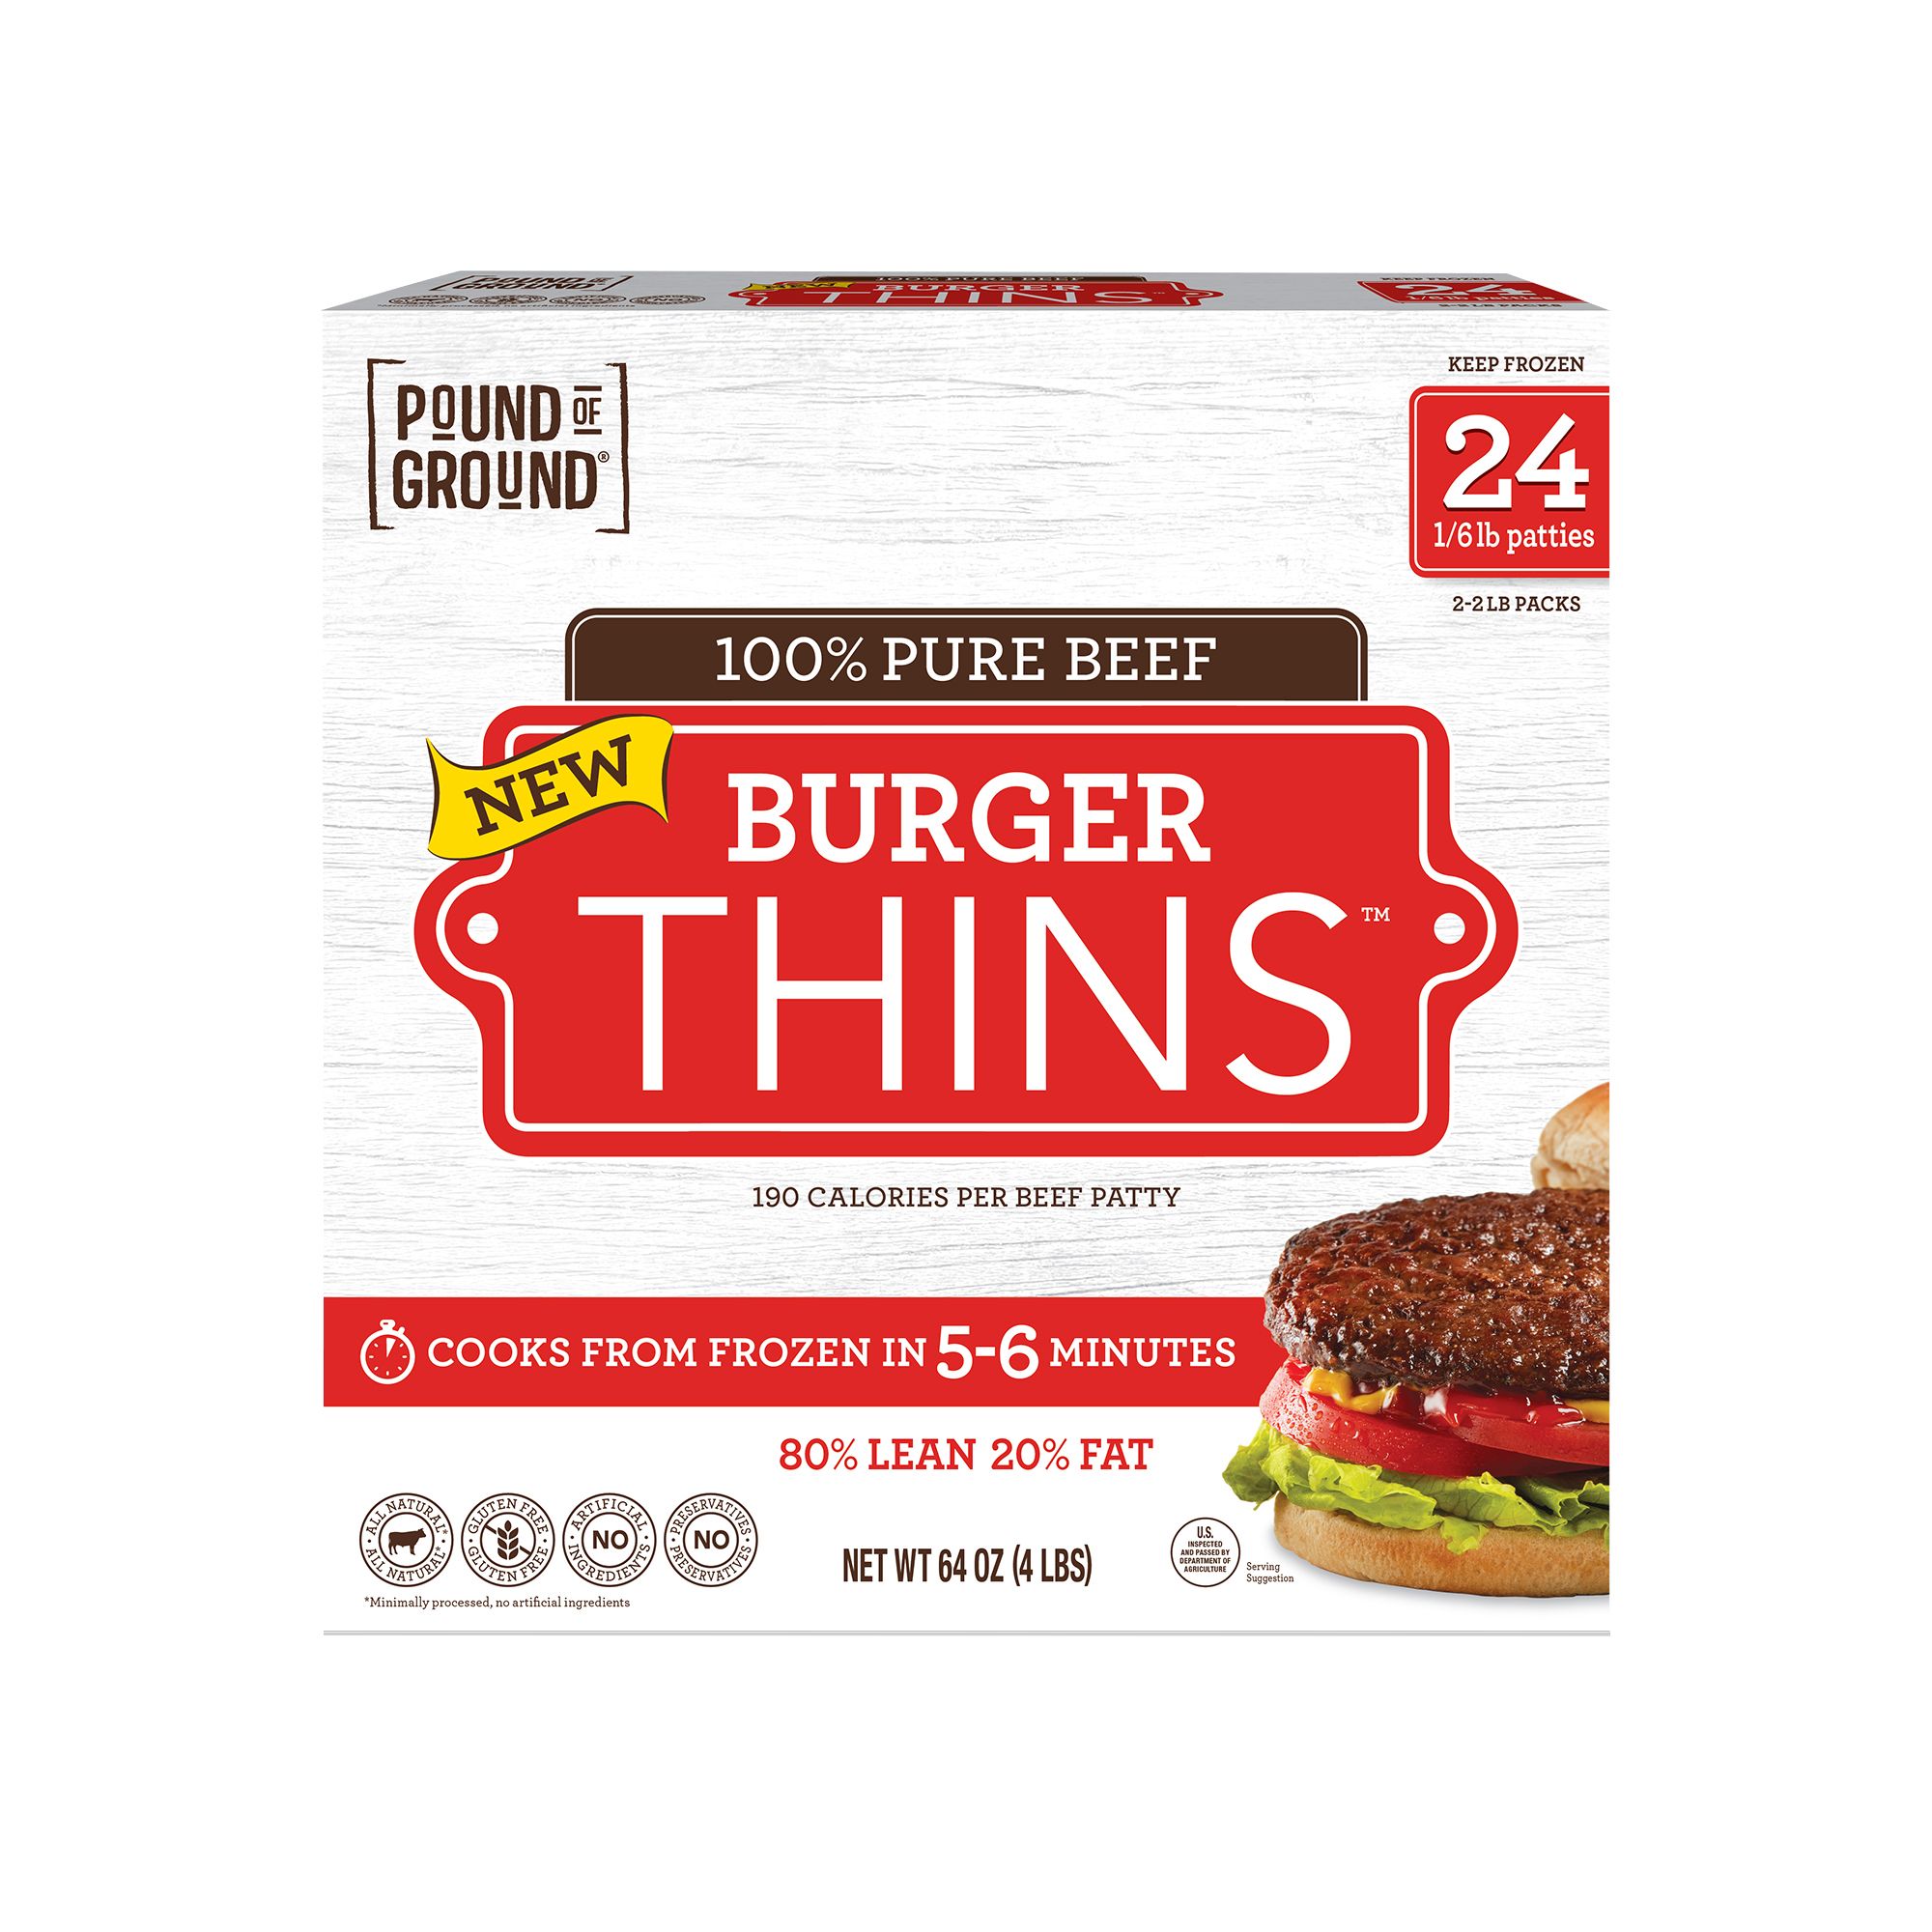 Pound of Ground Burger Thins Frozen Uncooked 100% Pure Beef Patties, 24 ct.